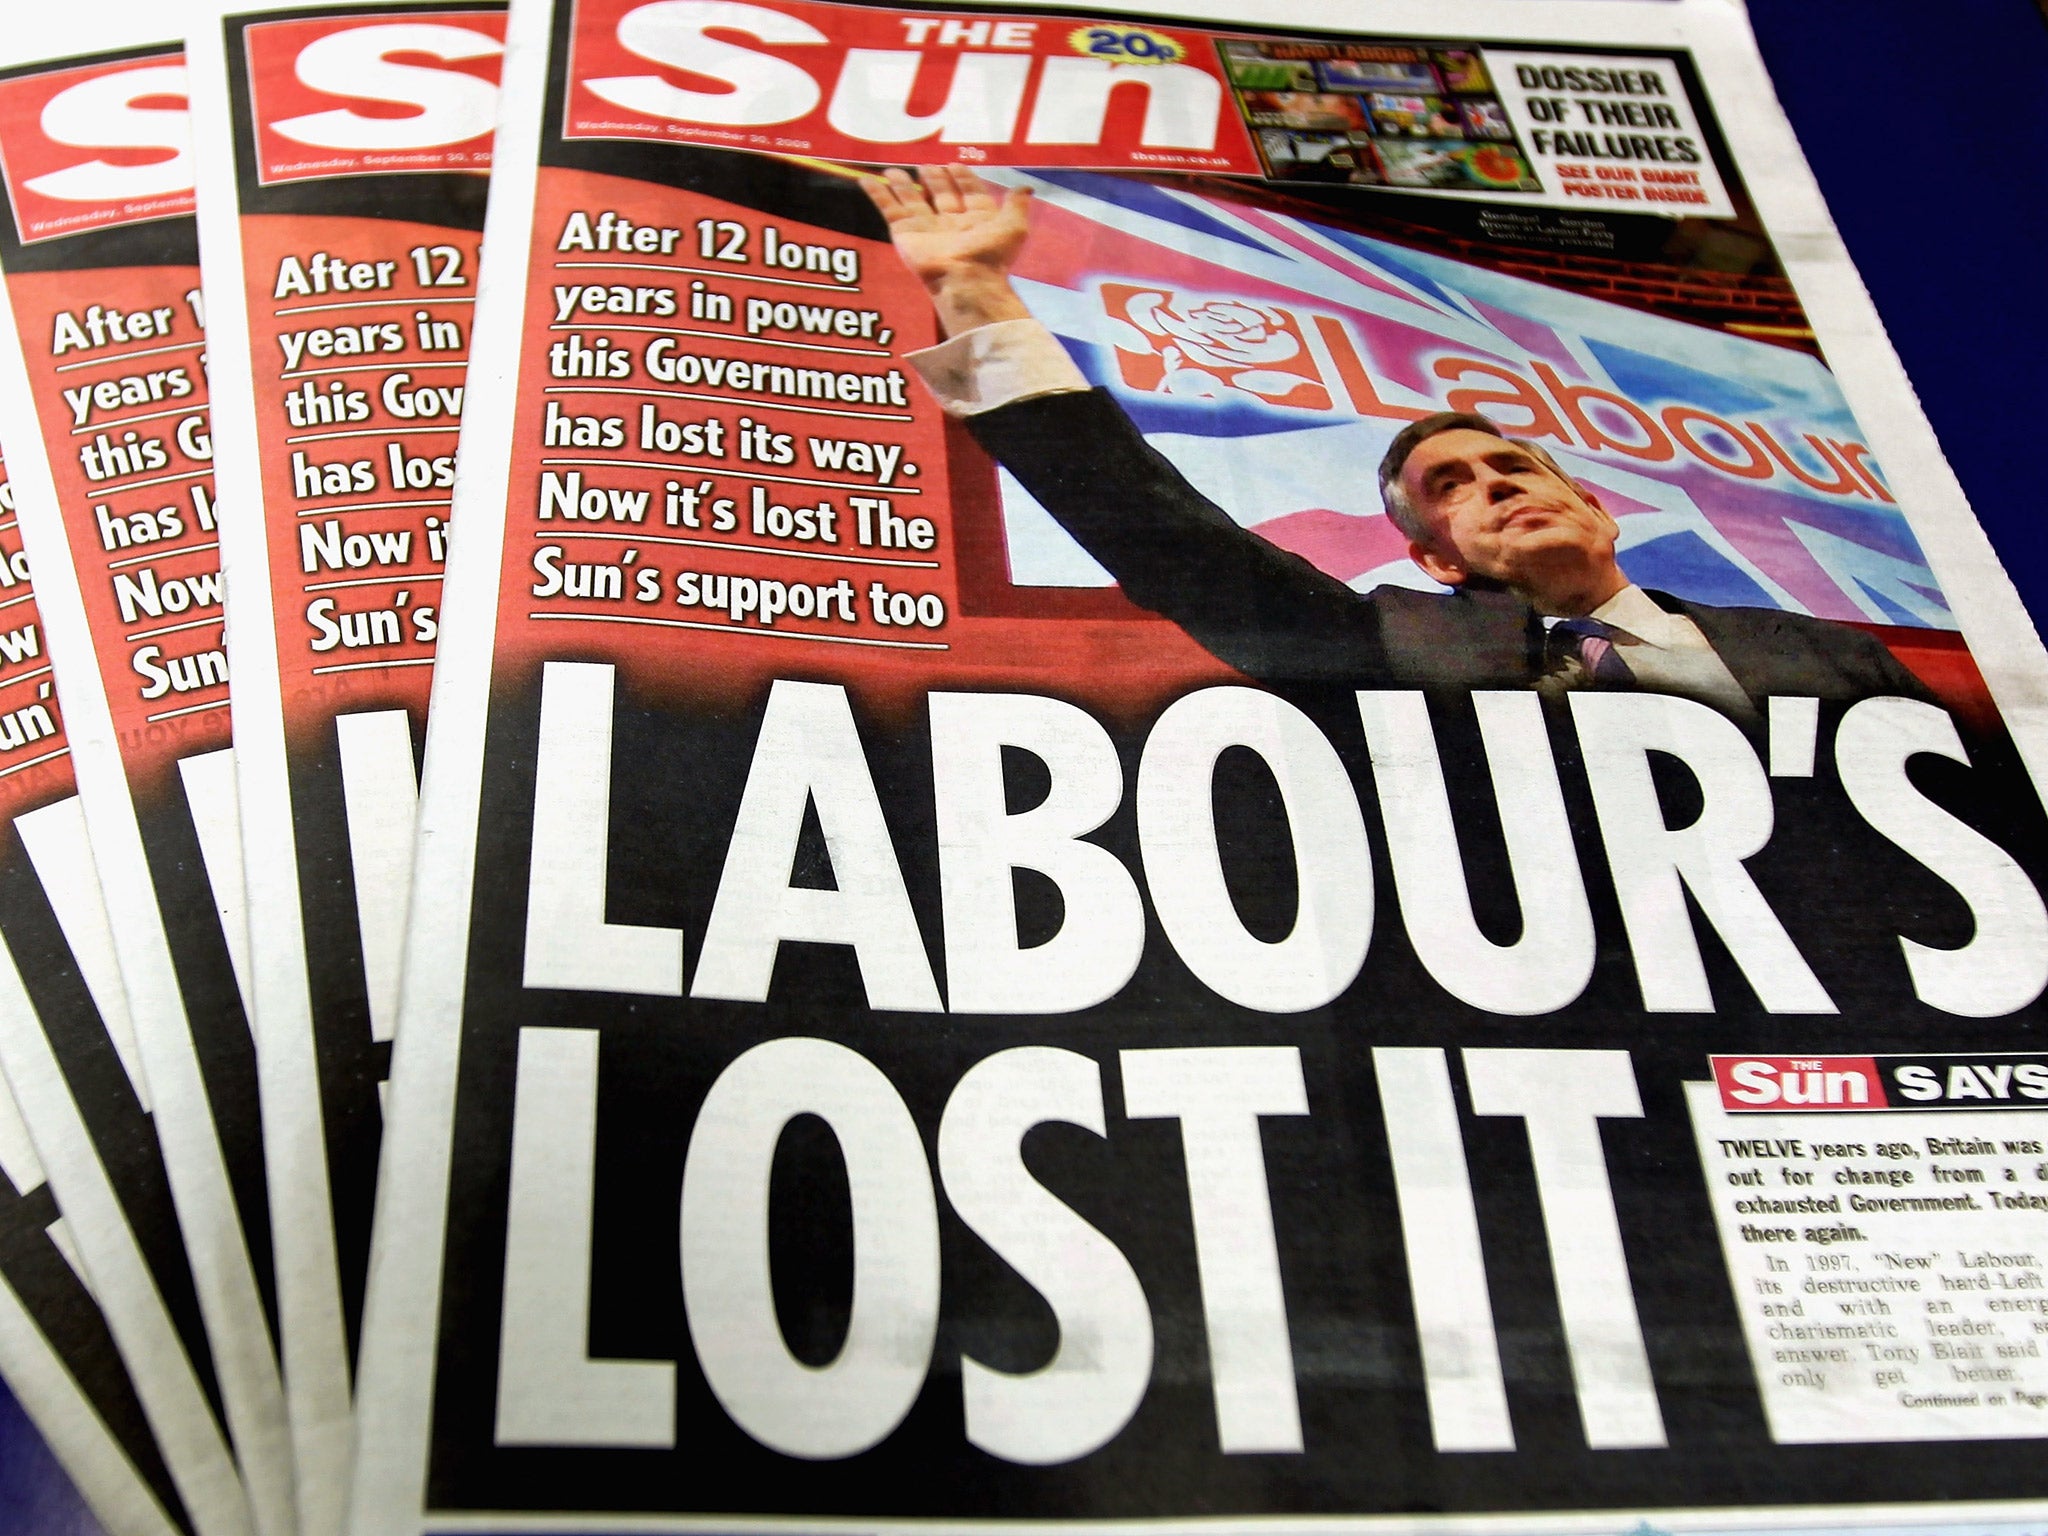 'The Sun' switched its allegiance from Labour to the Conservatives ahead of the 2010 election